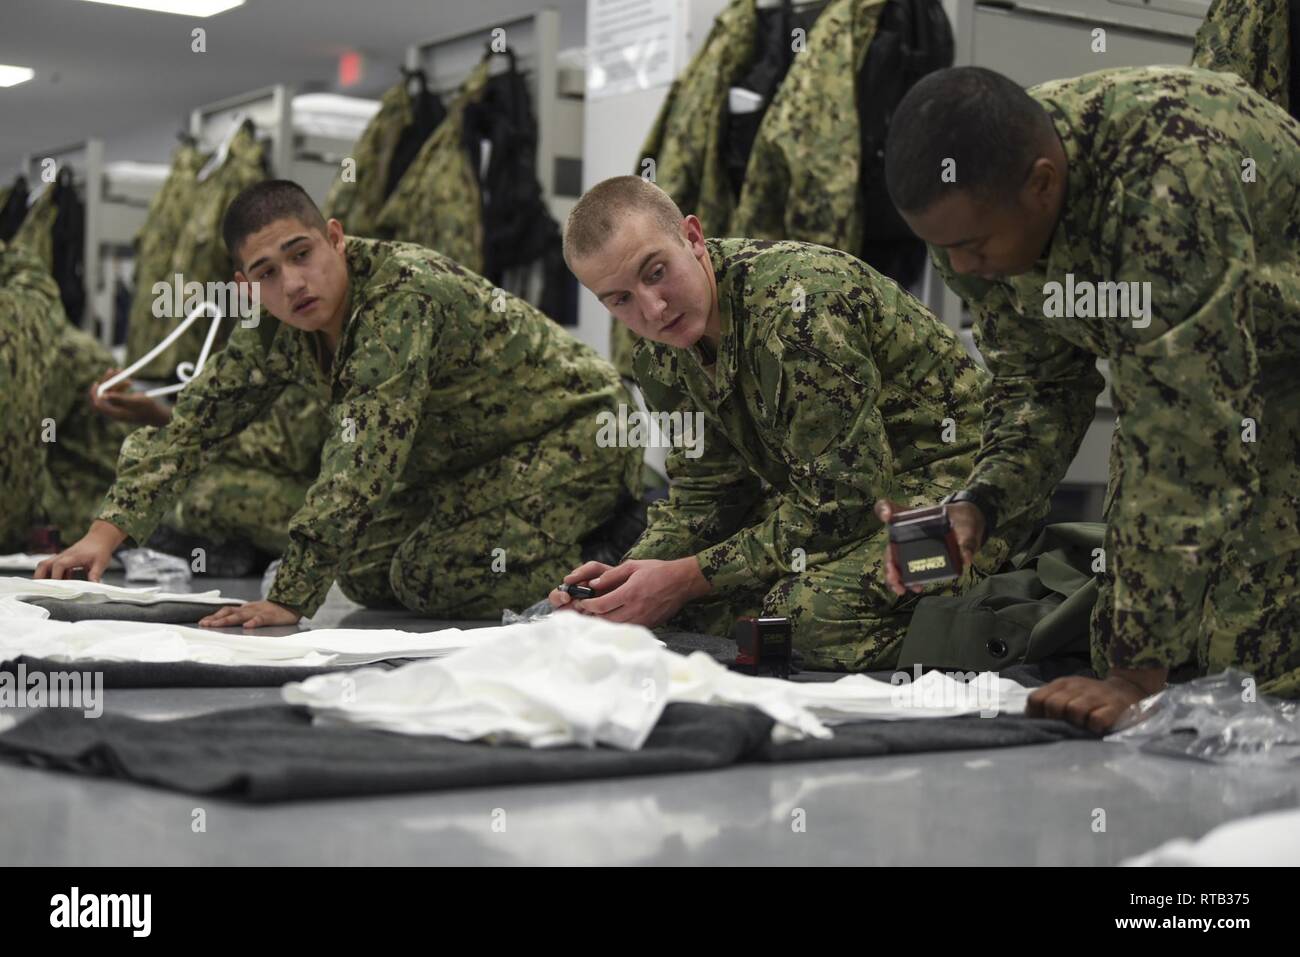 Great Lakes Ill Feb 6 2019 Recruits Stencil Their Uniforms Inside The Uss Arizona Recruit Barracks At Recruit Training Command More Than 30 000 Recruits Graduate Annually From The Navy S Only Boot Camp - rtb naval station great lakes roblox